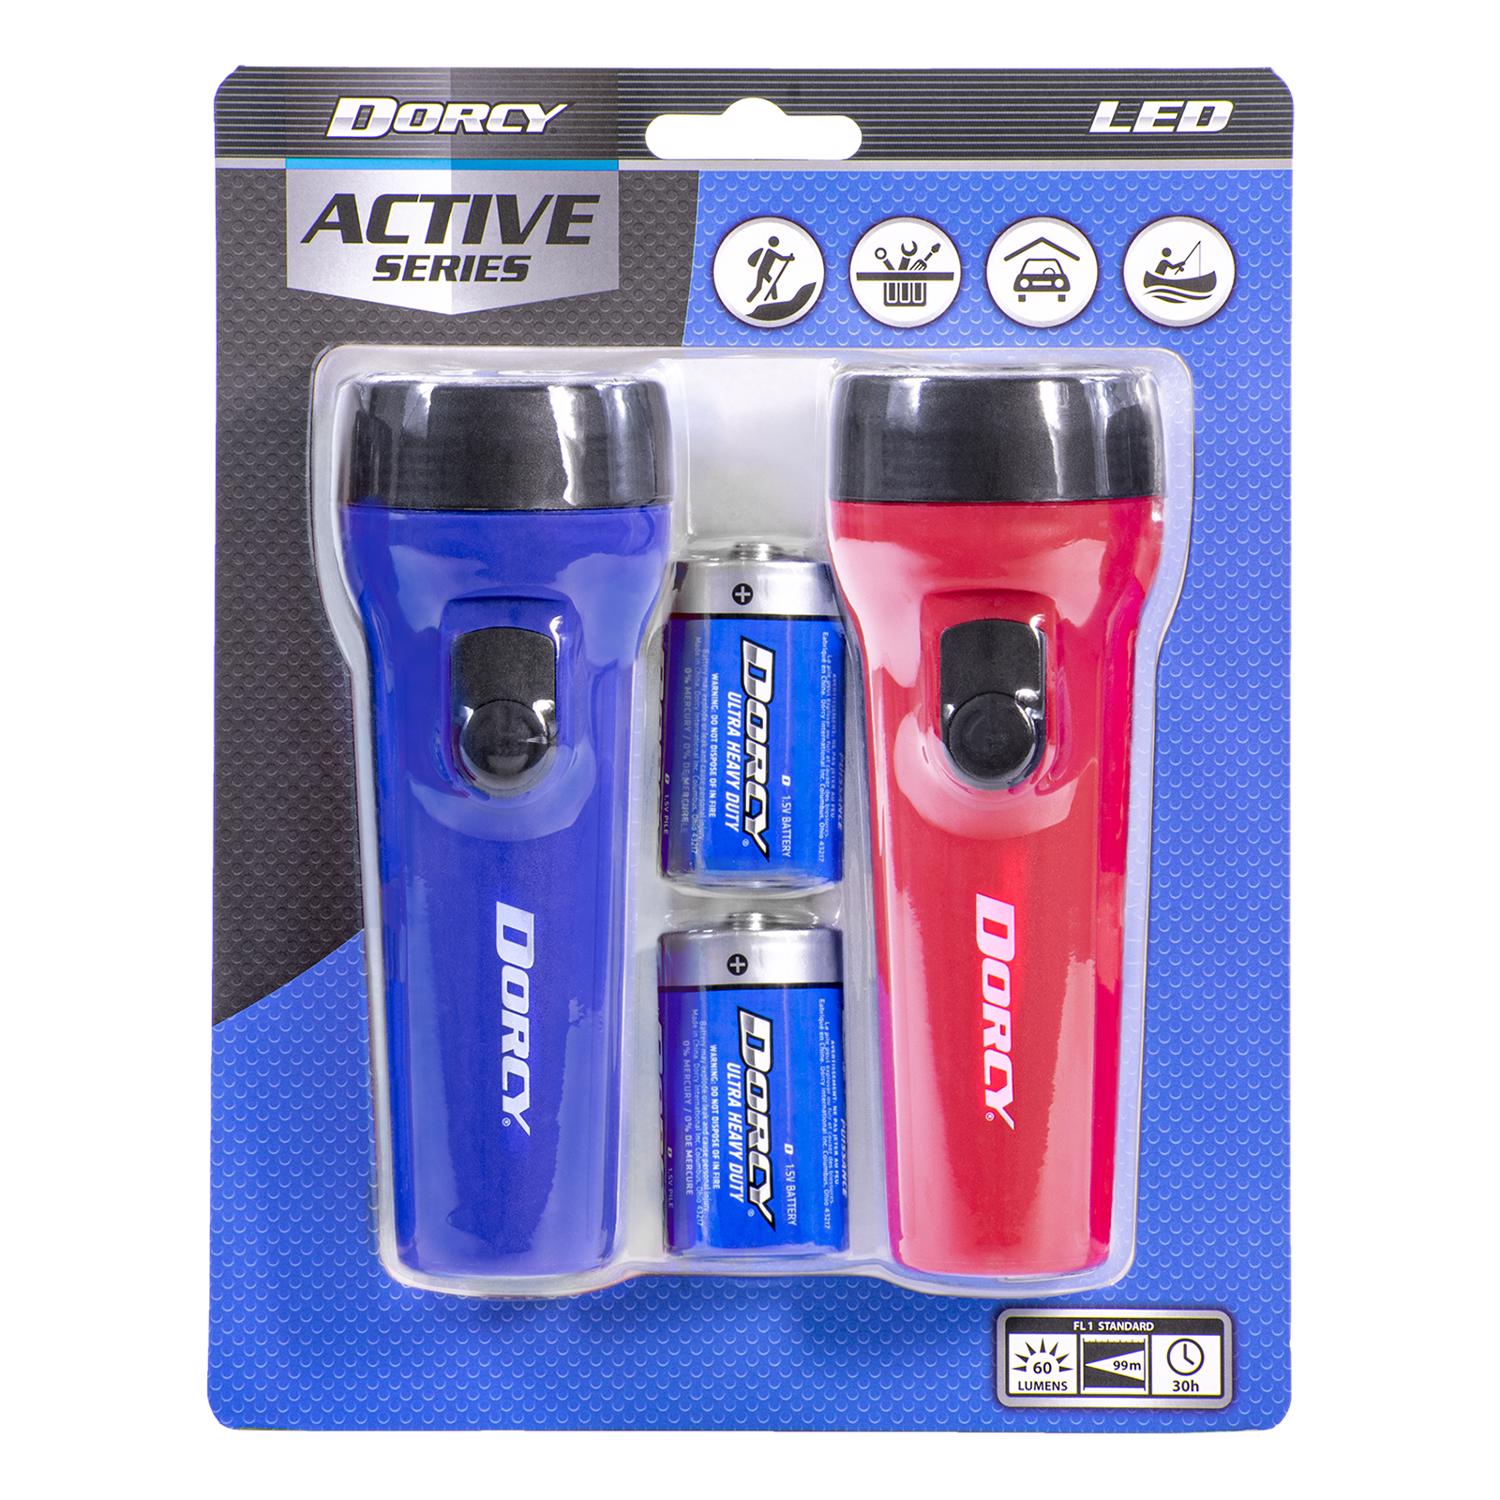 Photos - Torch Dorcy 60 lm Assorted LED Flashlight Combo Pack D Battery 41-2594